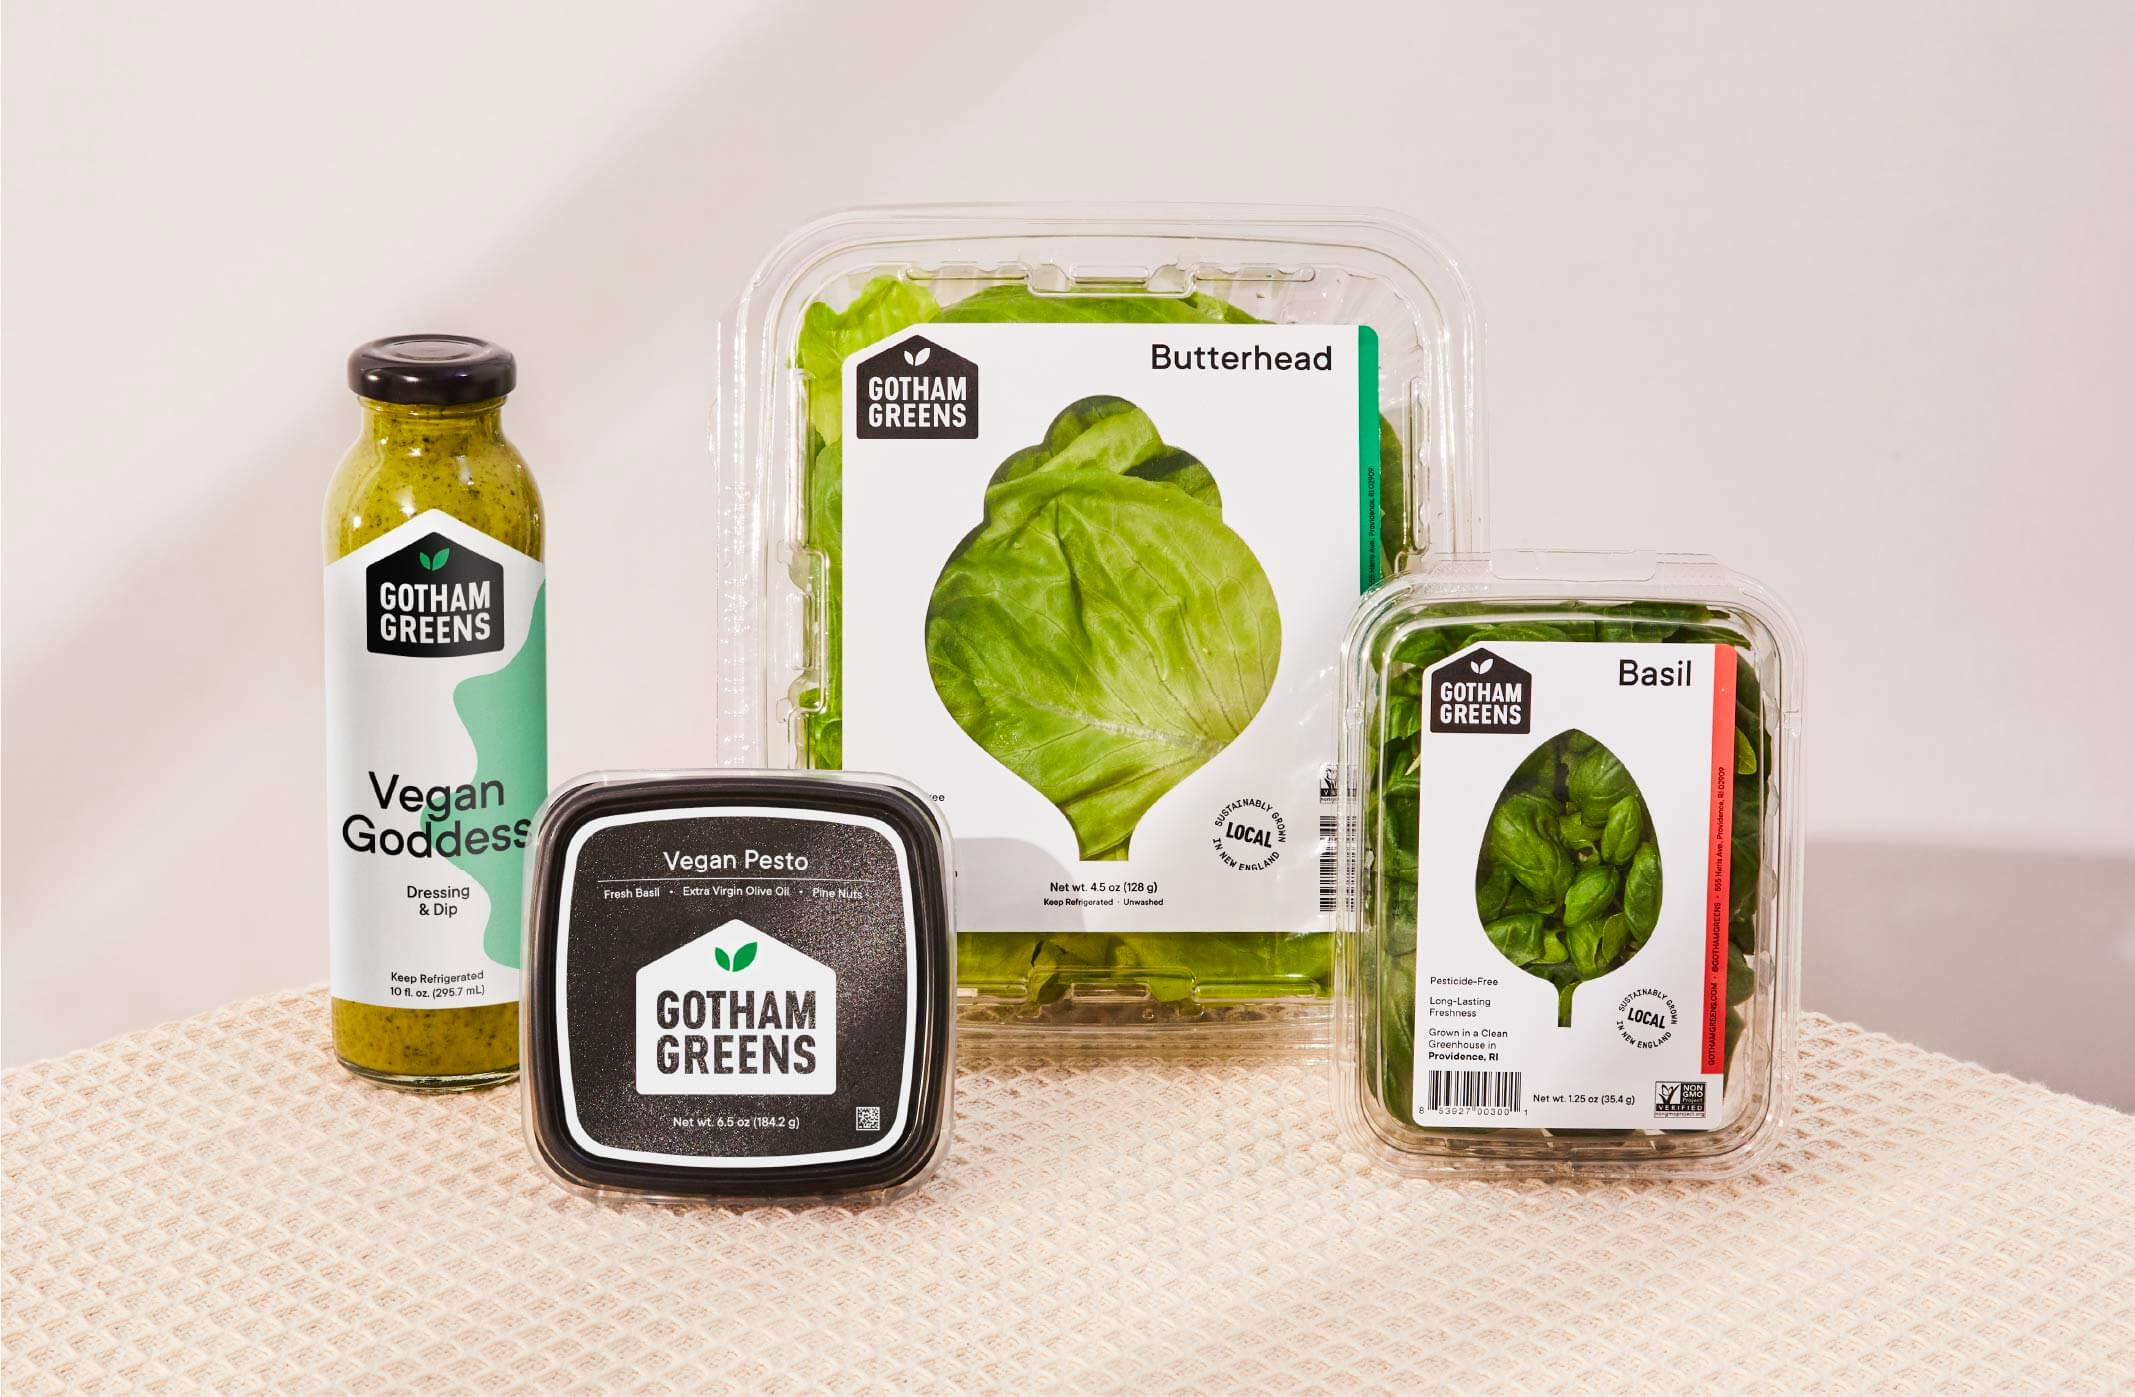 Gotham Greens Is An Imaginative Produce Brand With A Distinct Look